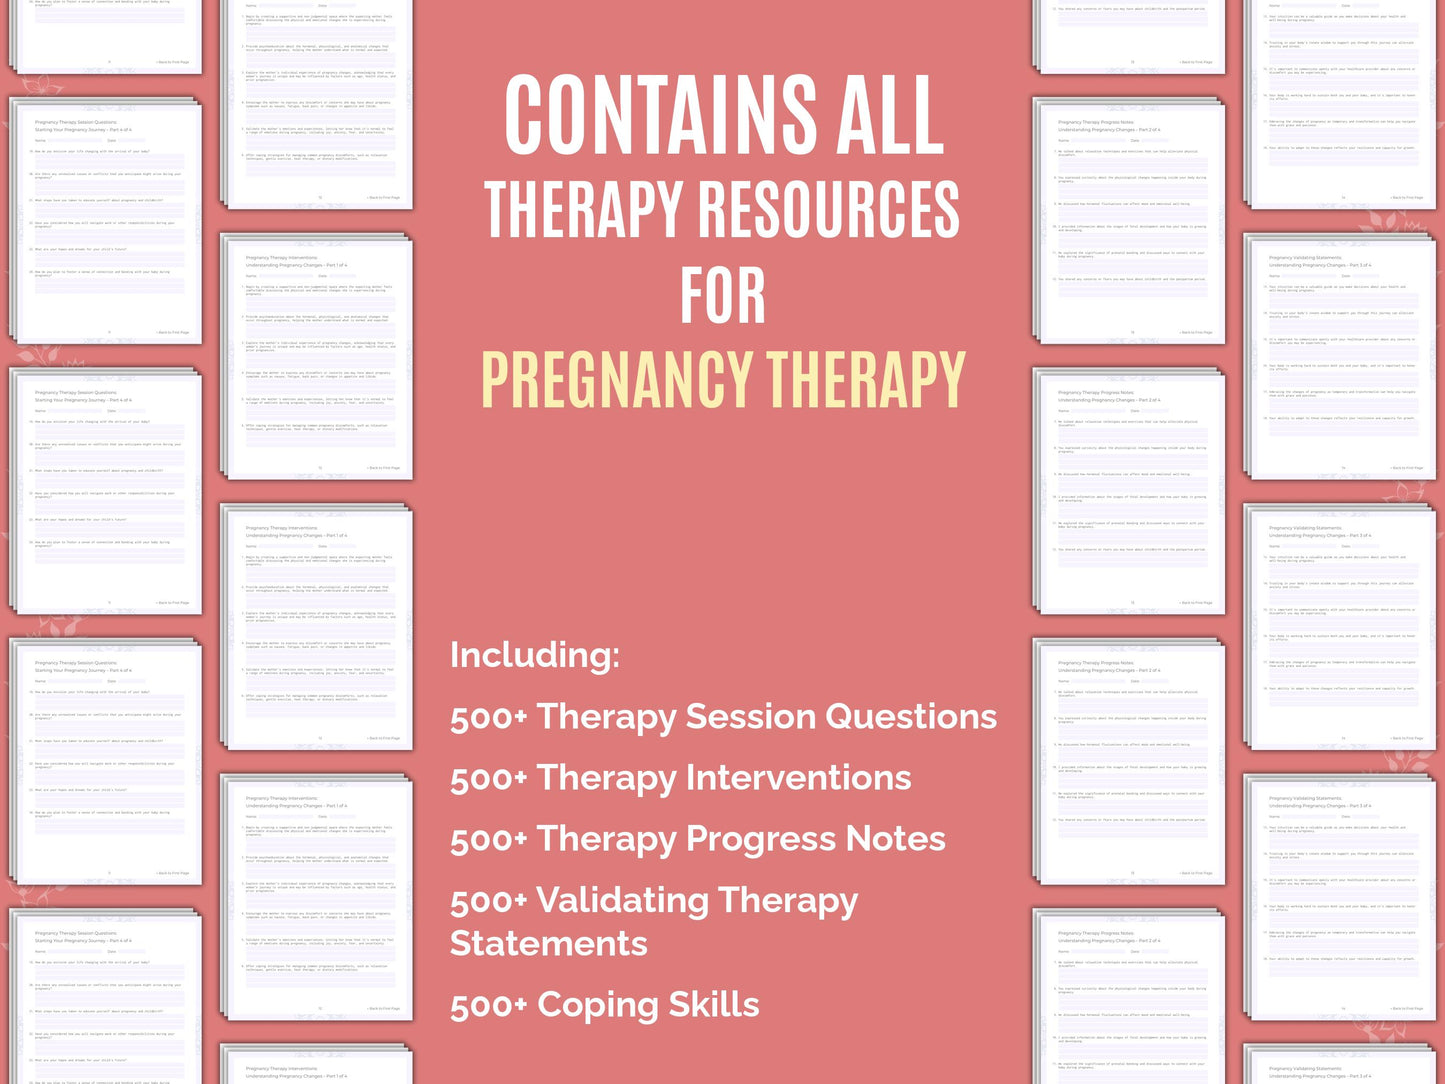 Validating Therapy Statements Workbook